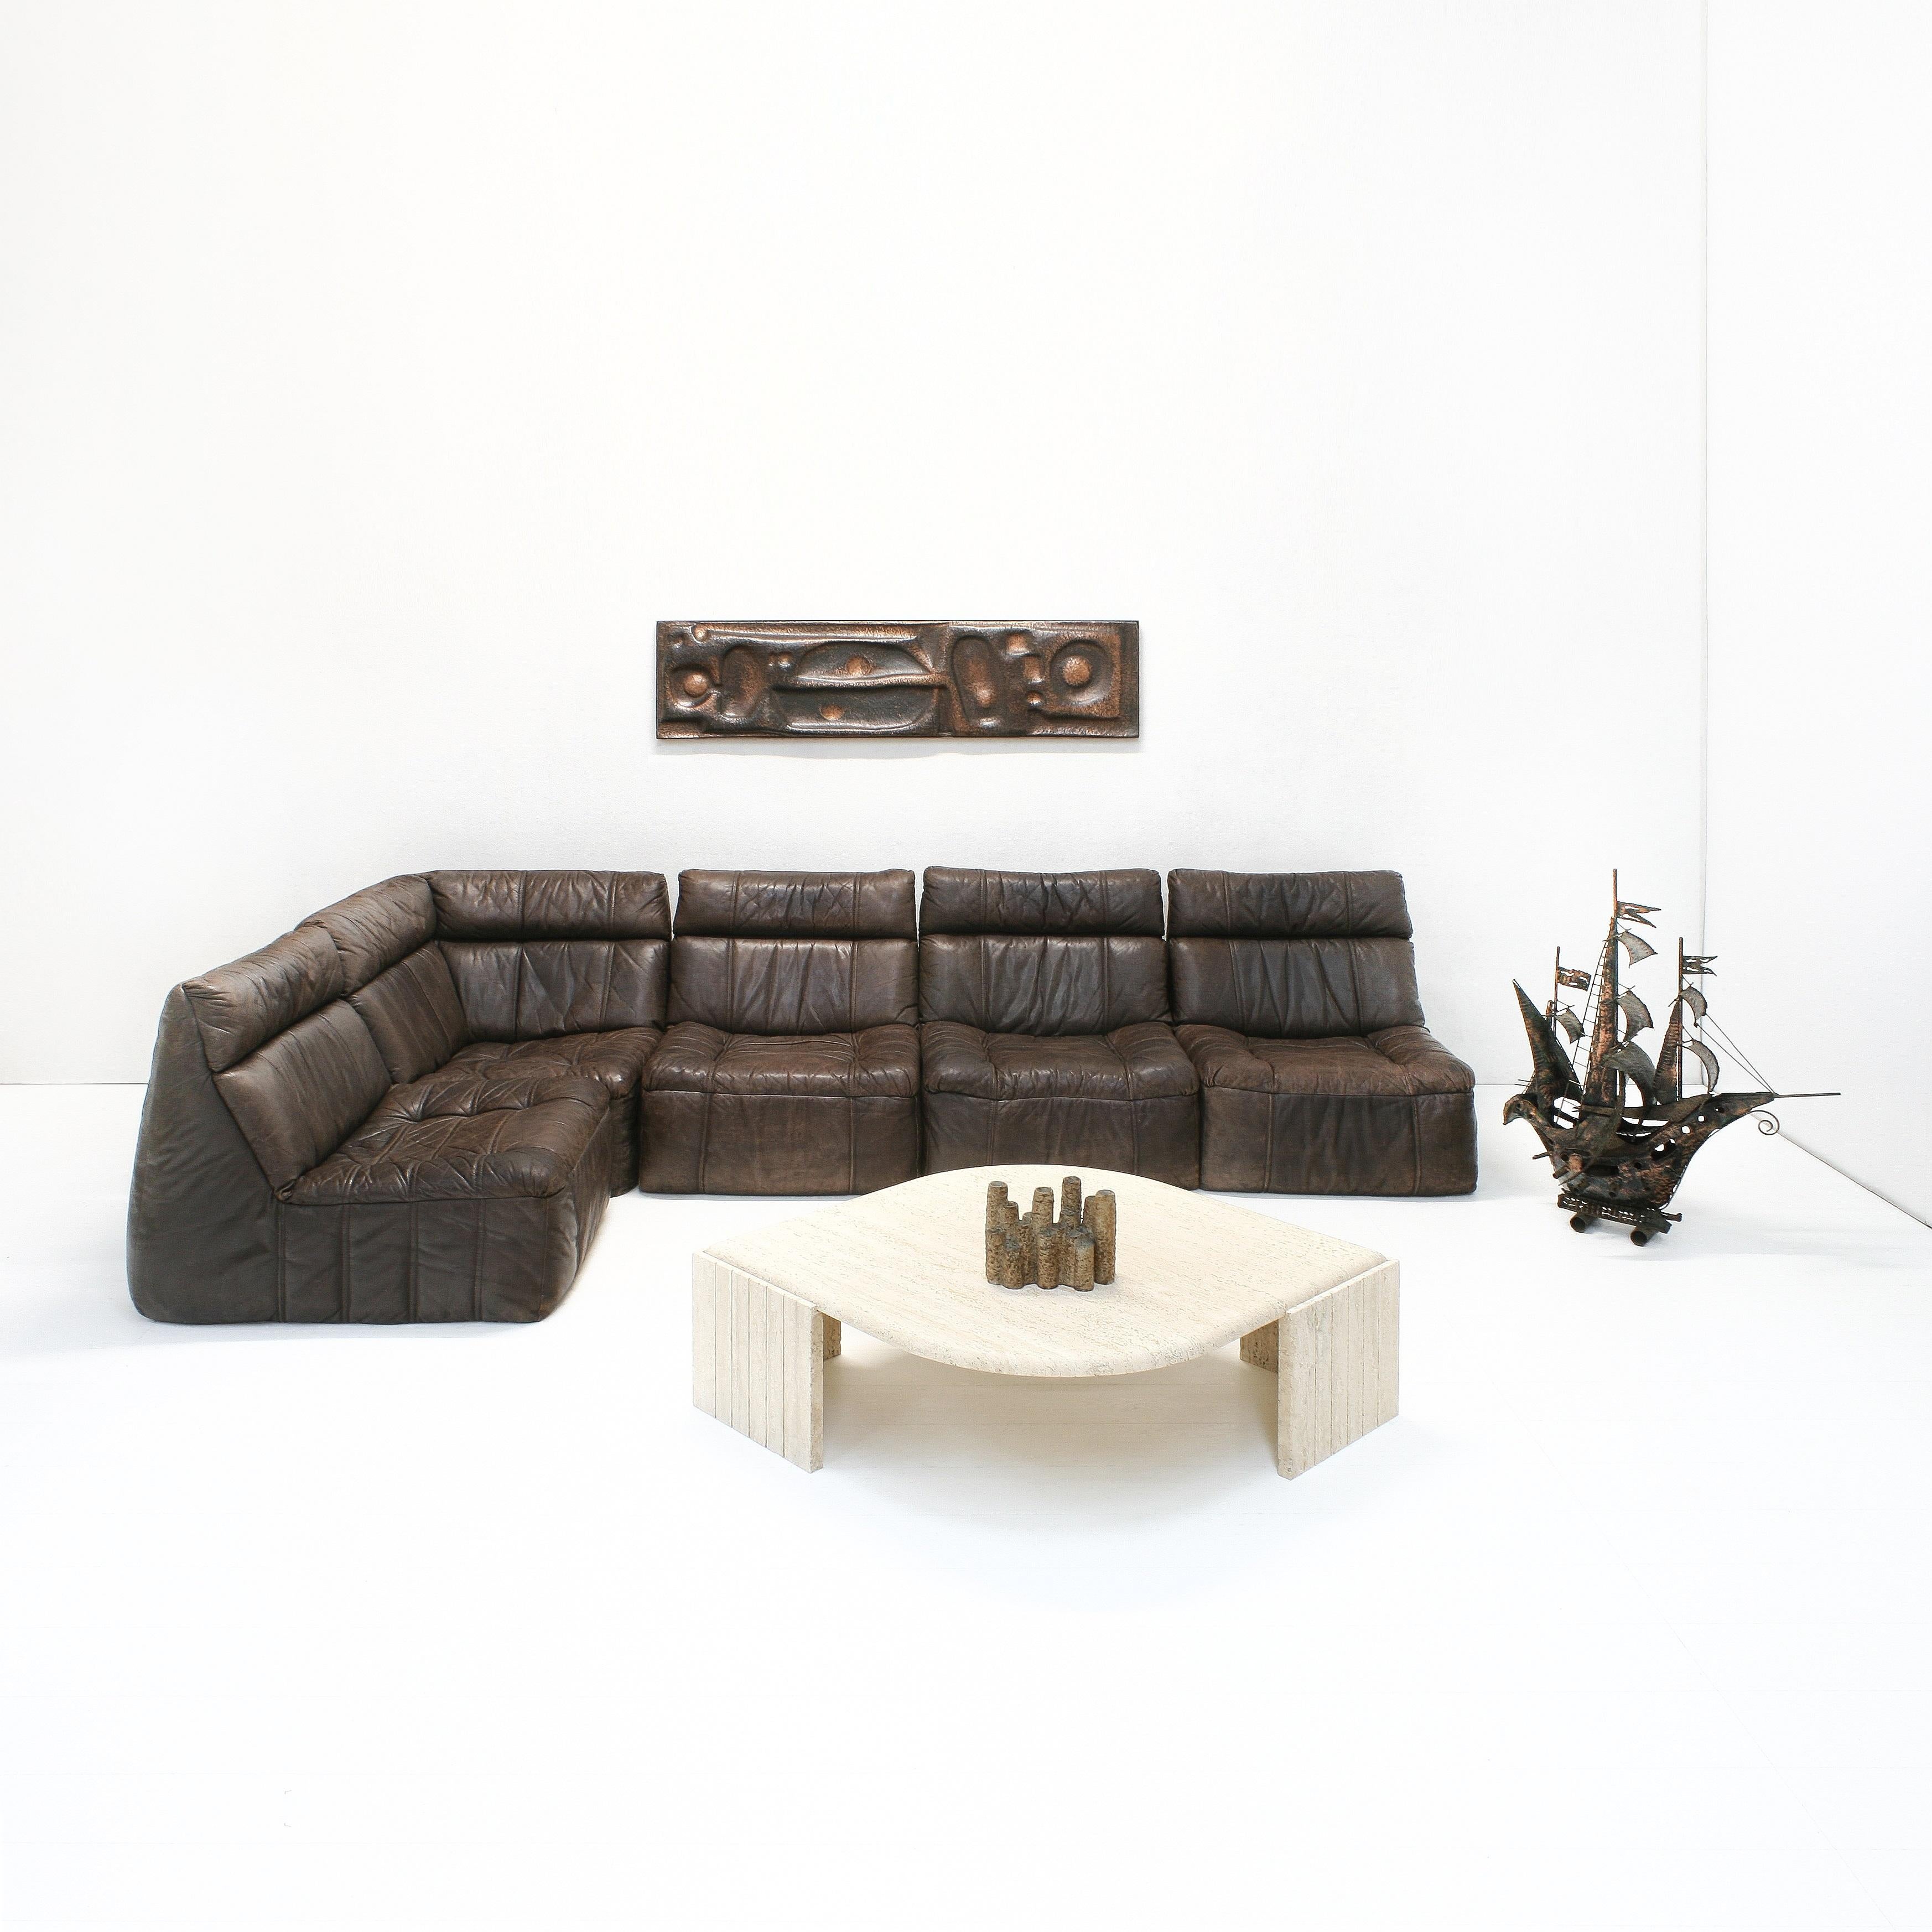 This all-foam sectional sofa, covered in lovely patinated leather exists of 4 straight elements (90 x 70cm) and 1 corner element (90 x 90cm).